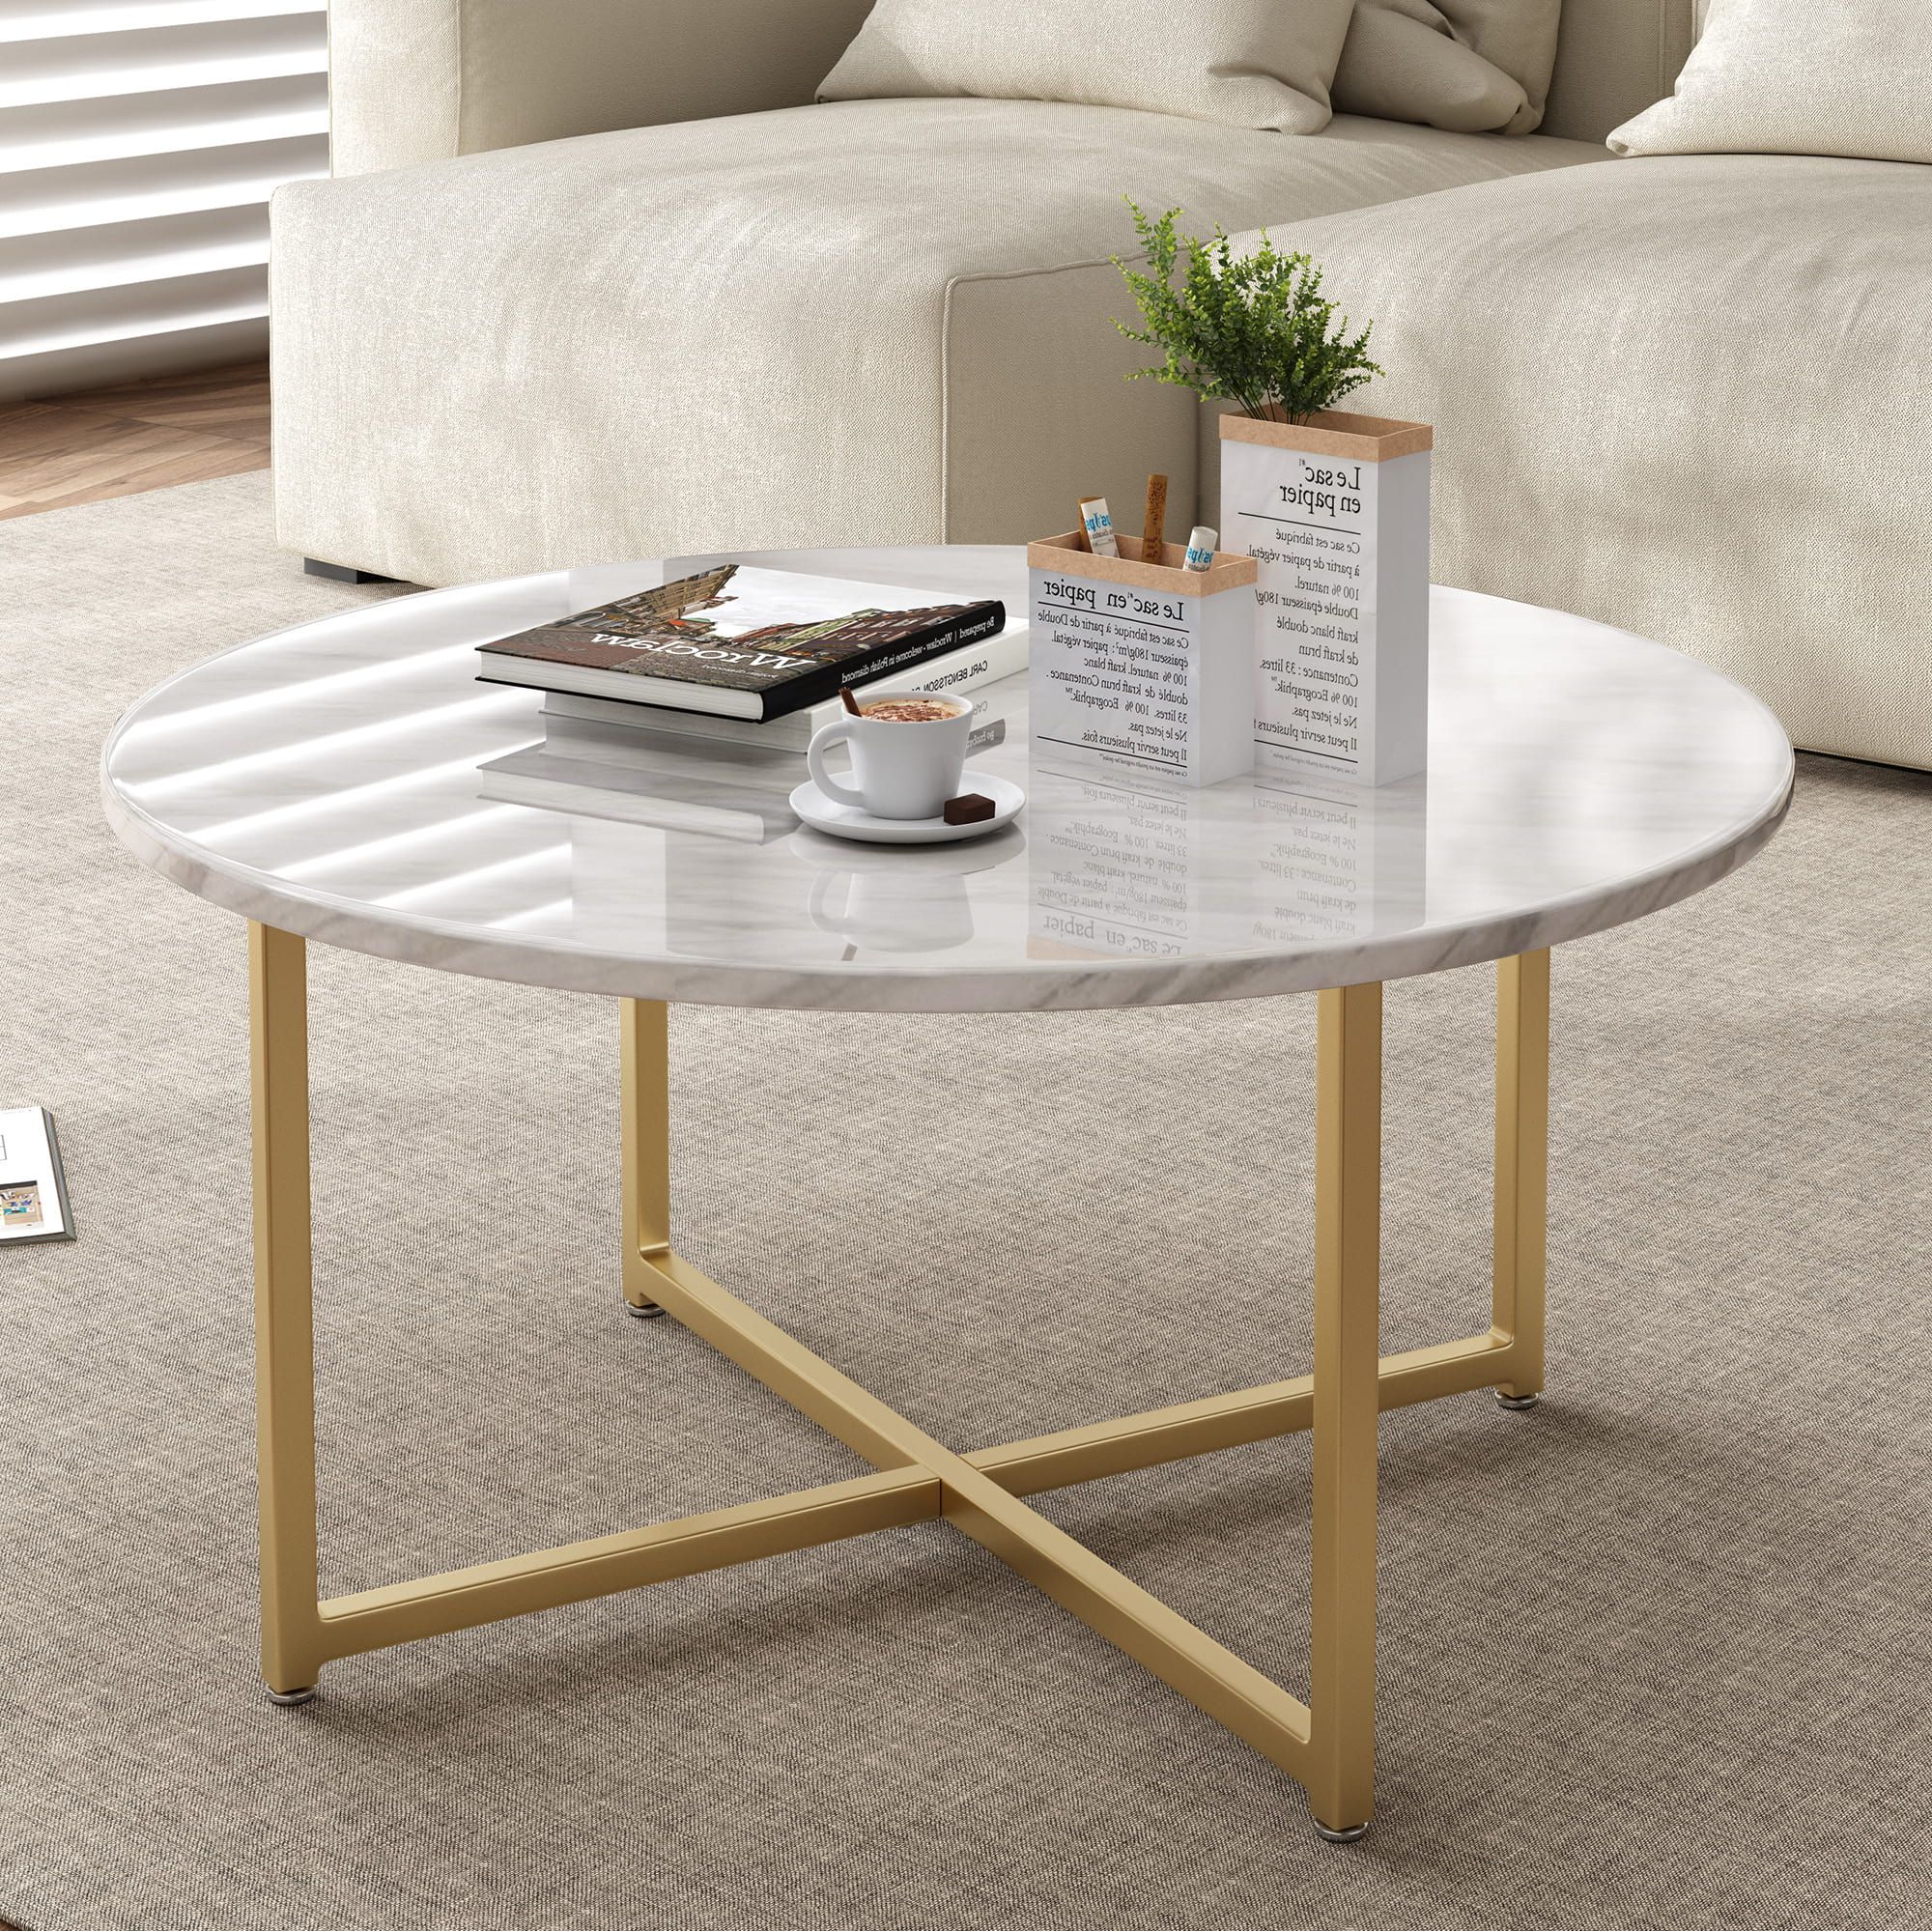 White Marble Effect Round Coffee Table With Gold Legs – Dreamo Living Pertaining To Famous Modern Round Faux Marble Coffee Tables (View 9 of 10)